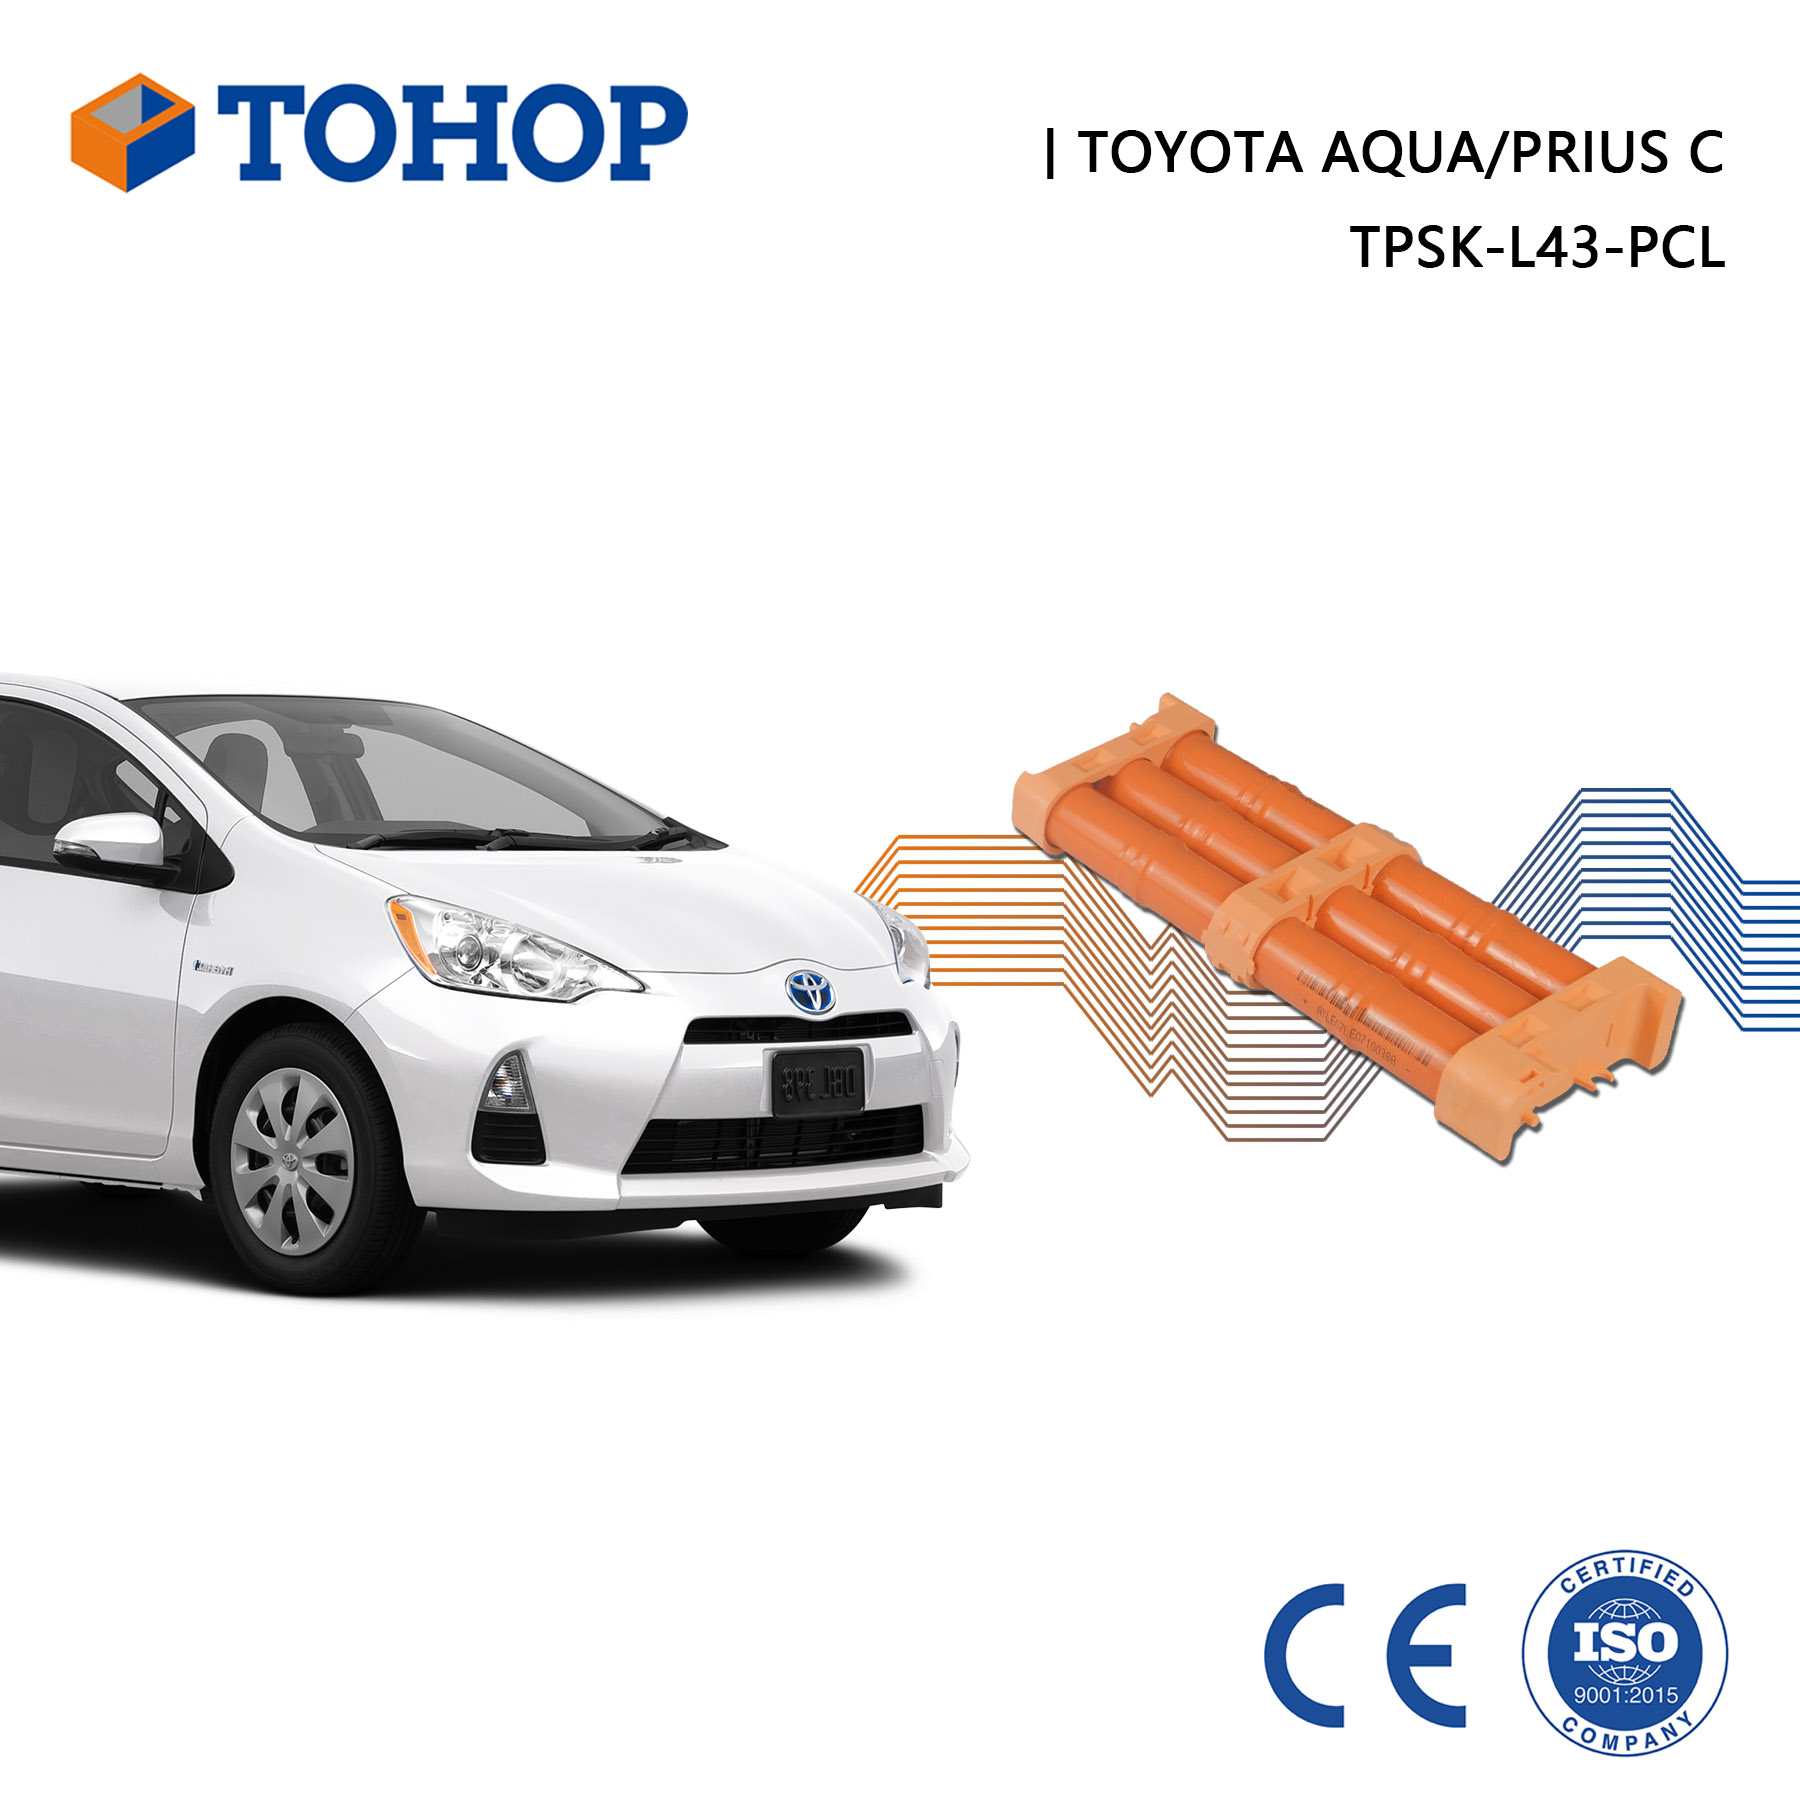 Cylindrical Replacement Hybrid Battery for Toyota Aqua Prius C NHP10 14.4V 6.5Ah